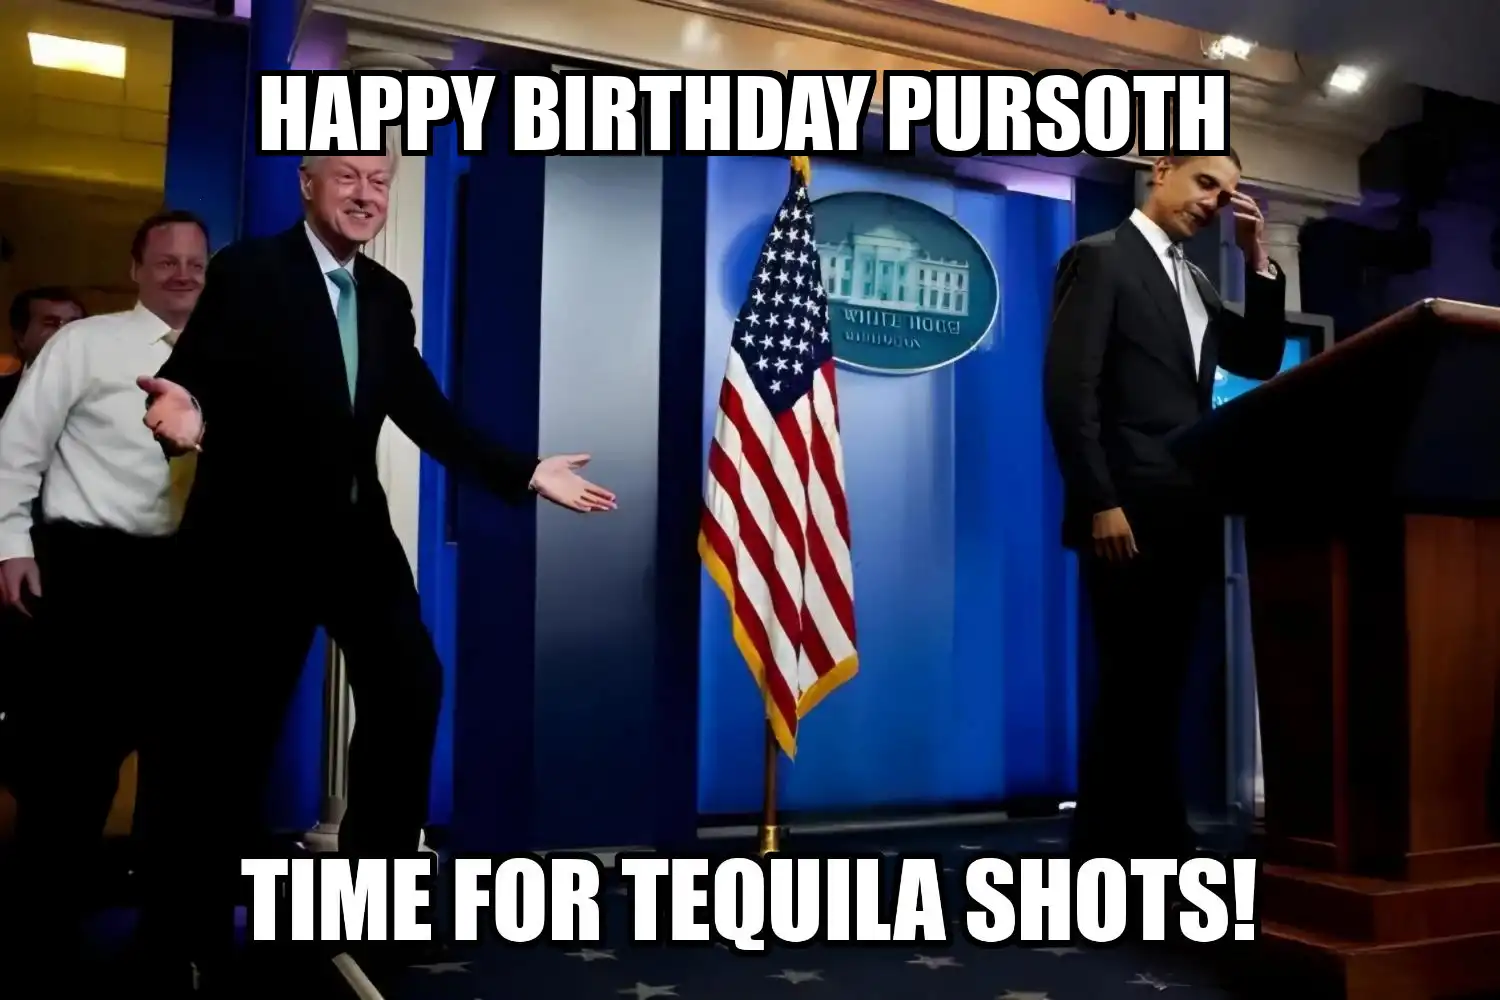 Happy Birthday Pursoth Time For Tequila Shots Memes